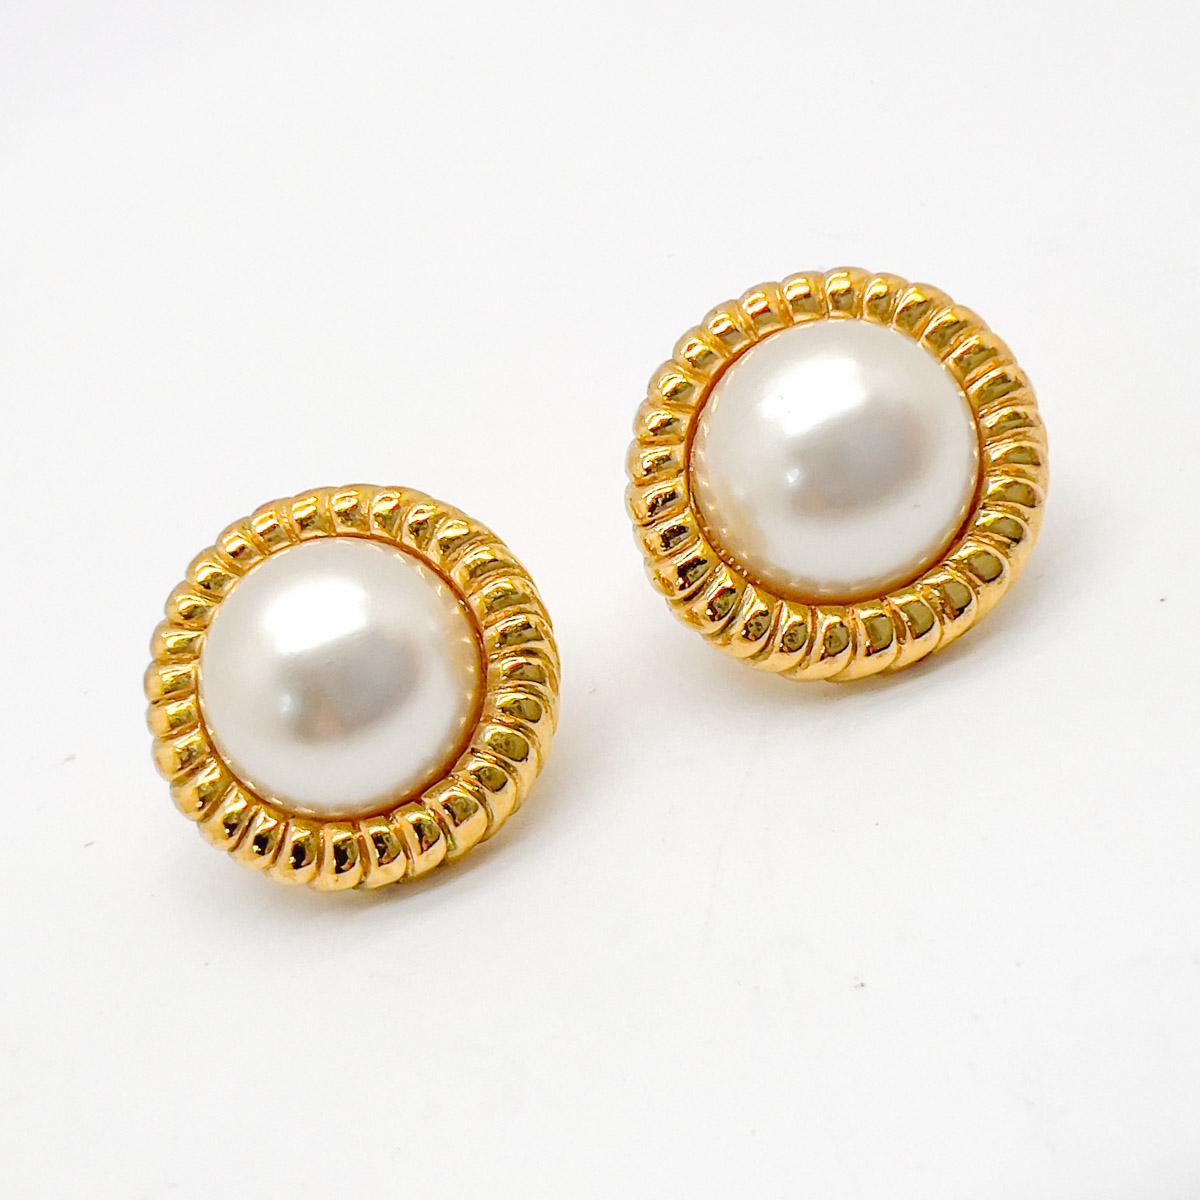 A pair of Vintage Pearl Ribbed Gallery Earrings. Fabulous quality and lustrous pearls. The ultimate chic accessory.
An unsigned beauty. A rare treasure. Just because a jewel doesn’t carry a designer name, doesn’t mean it isn't coveted. The unsigned